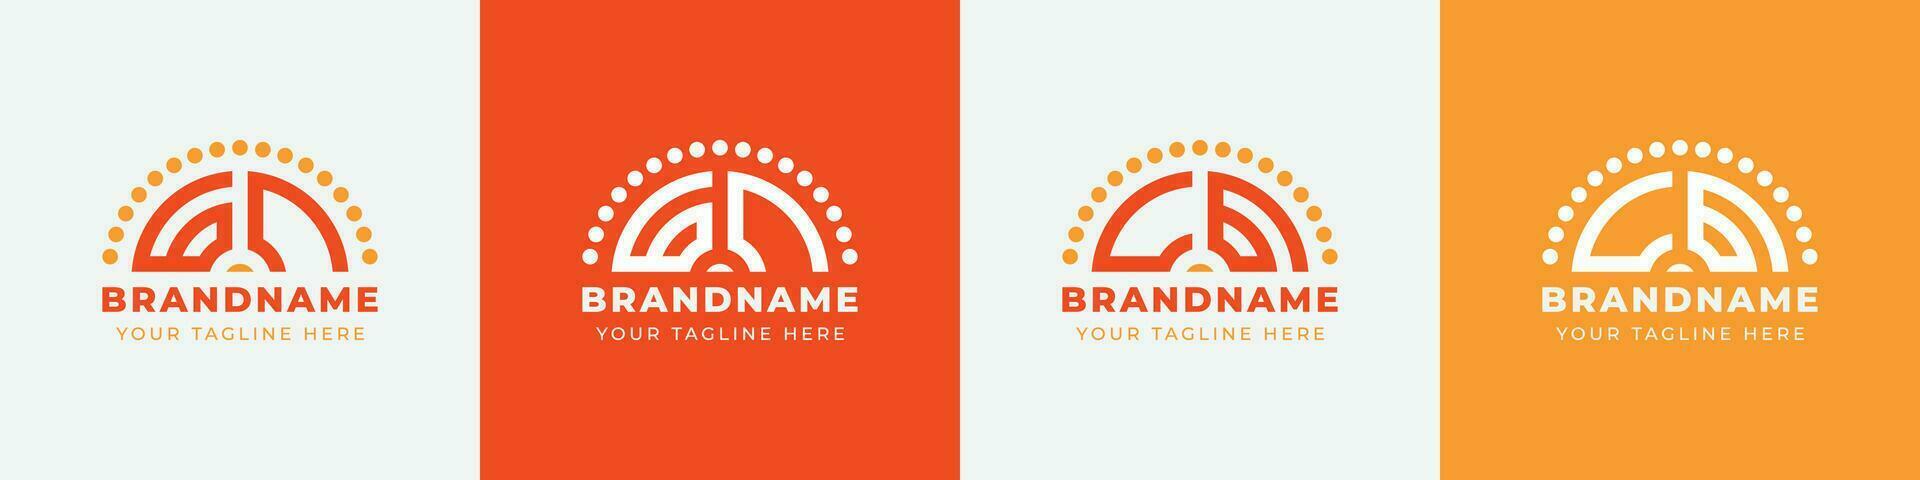 Letter CG and GC Sunrise  Logo Set, suitable for any business with CG or GC initials. vector